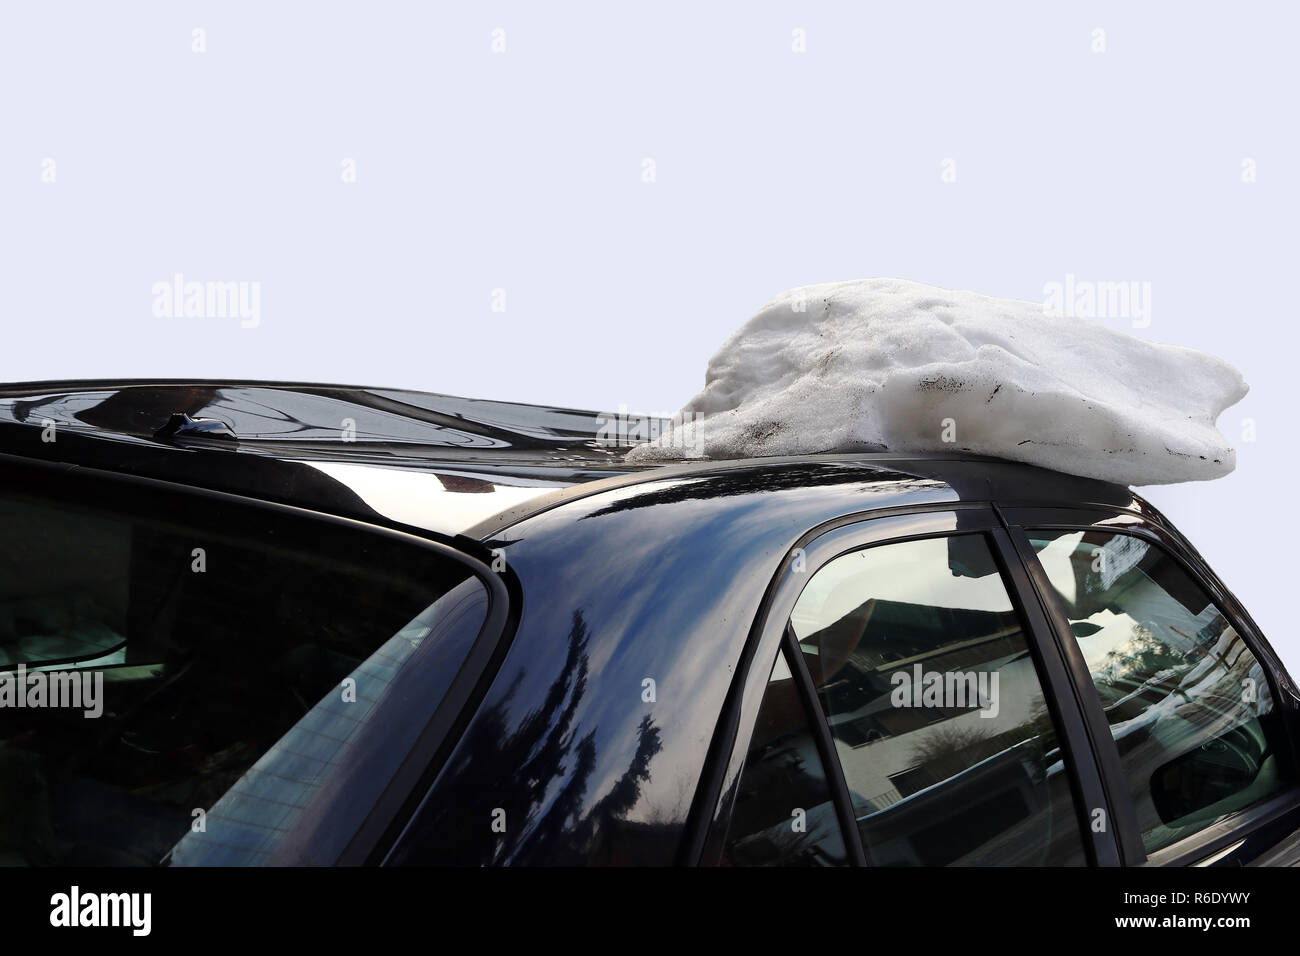 a roof avalanche severely damaged a black car on the roof. damaged by a roof avalanche on a car Stock Photo